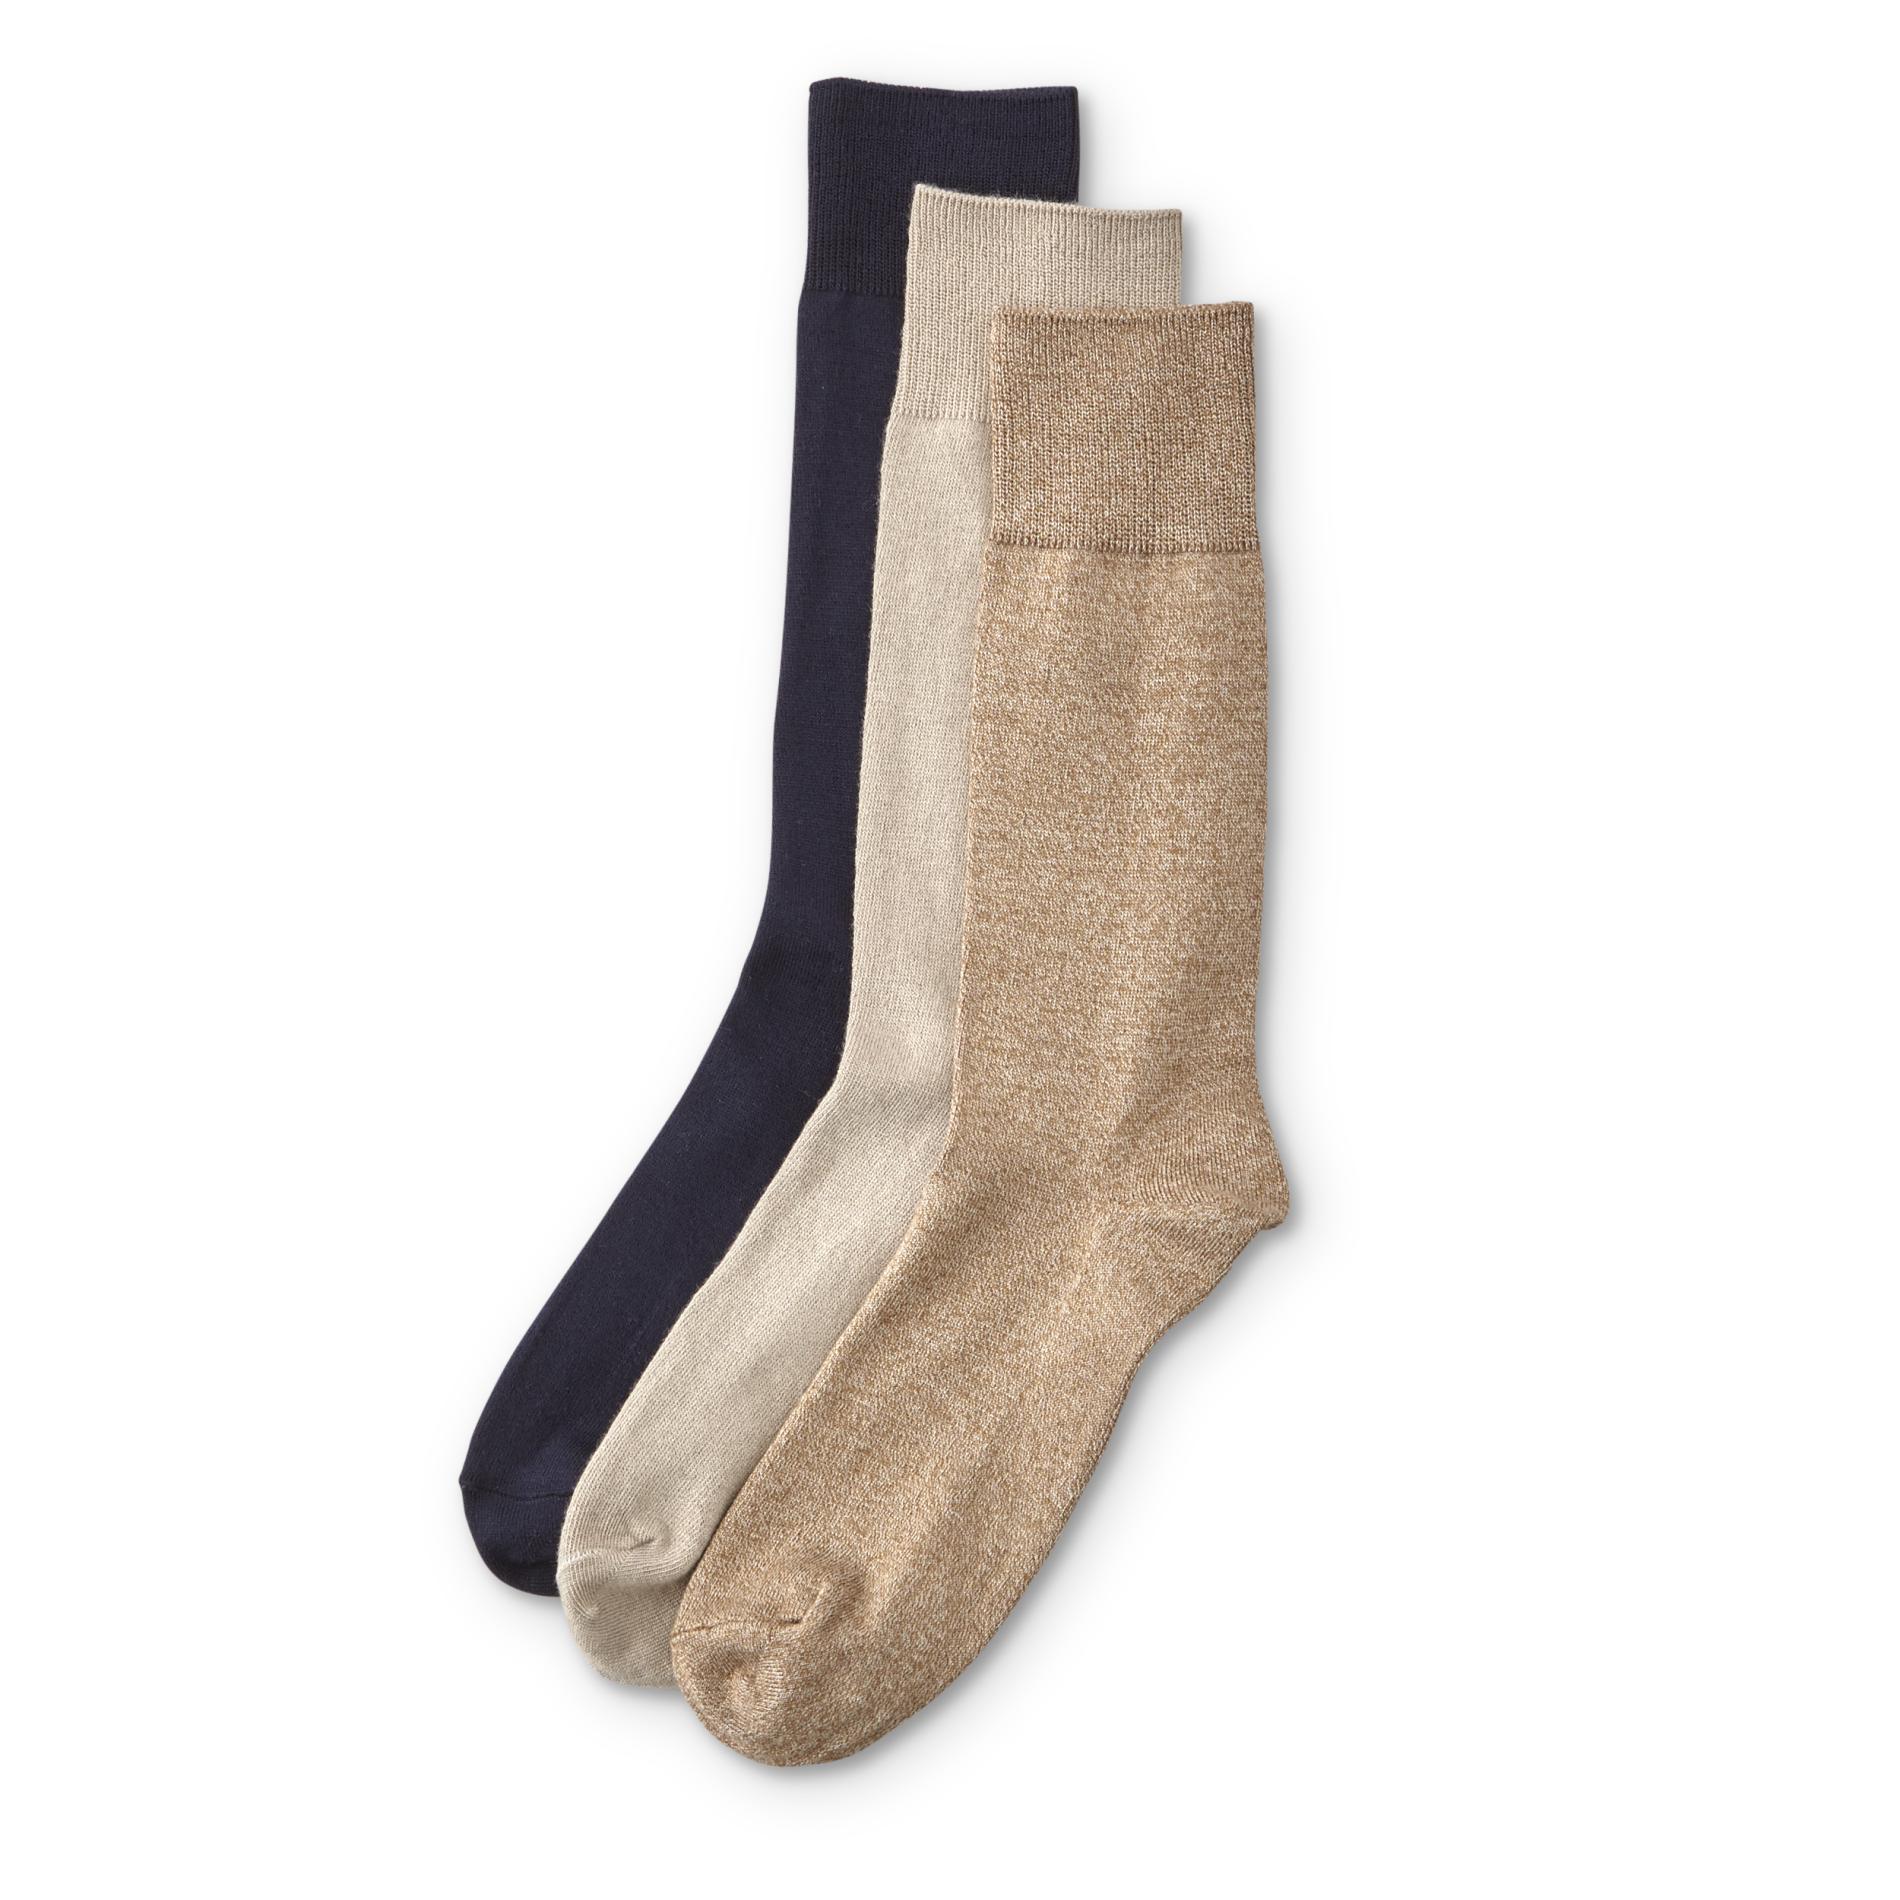 Structure Men's 3-Pairs Dress Socks - Assorted